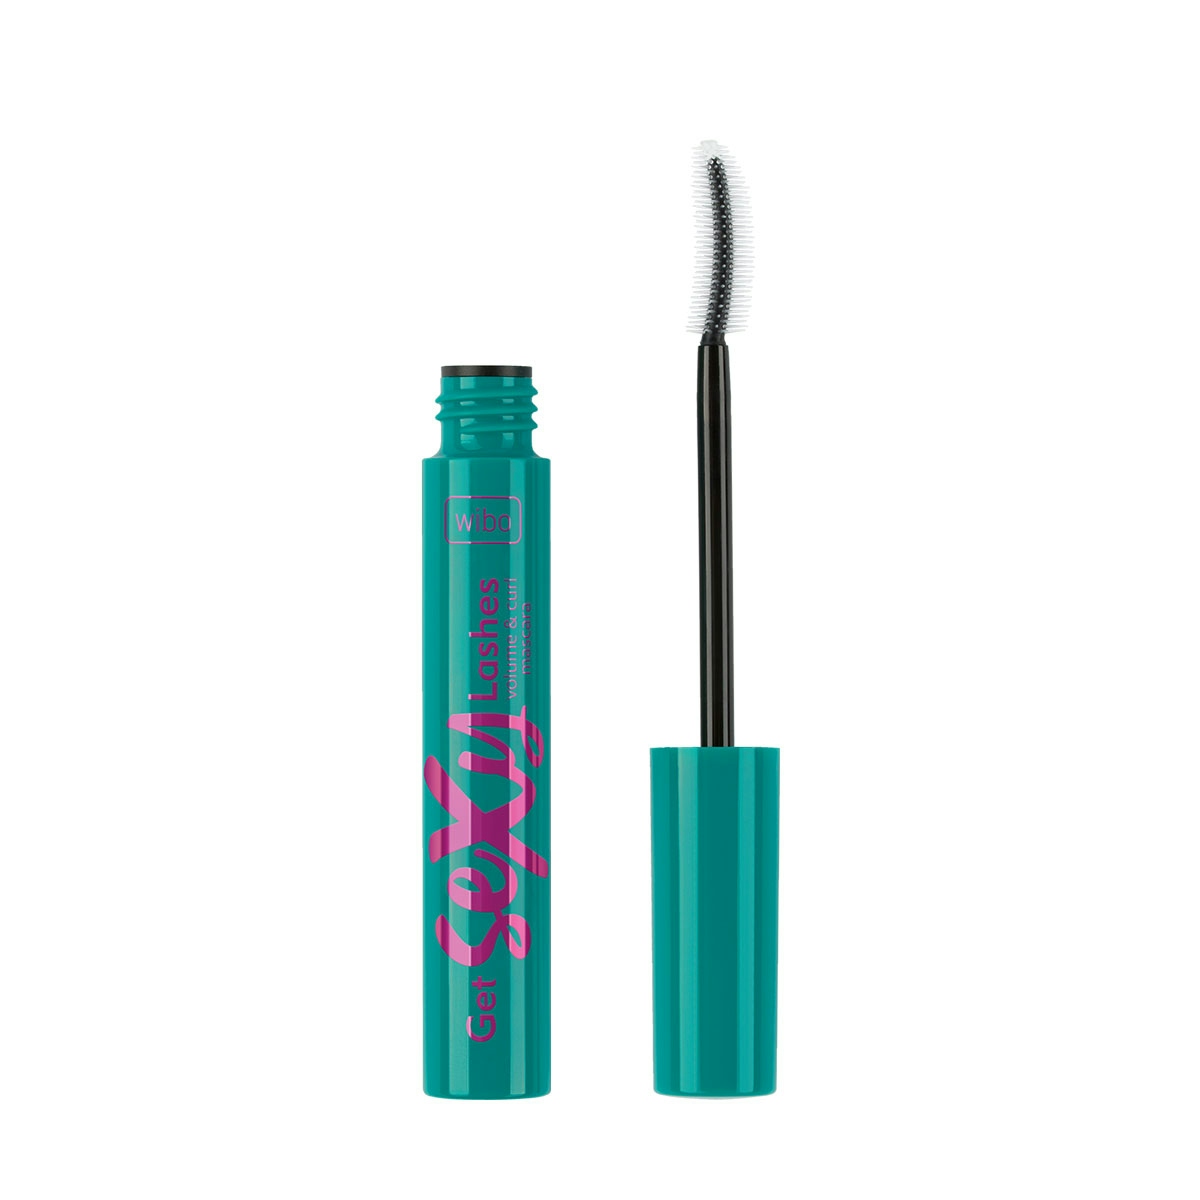 Mascara Get Sexy Lashes Volume & Curling Wibo